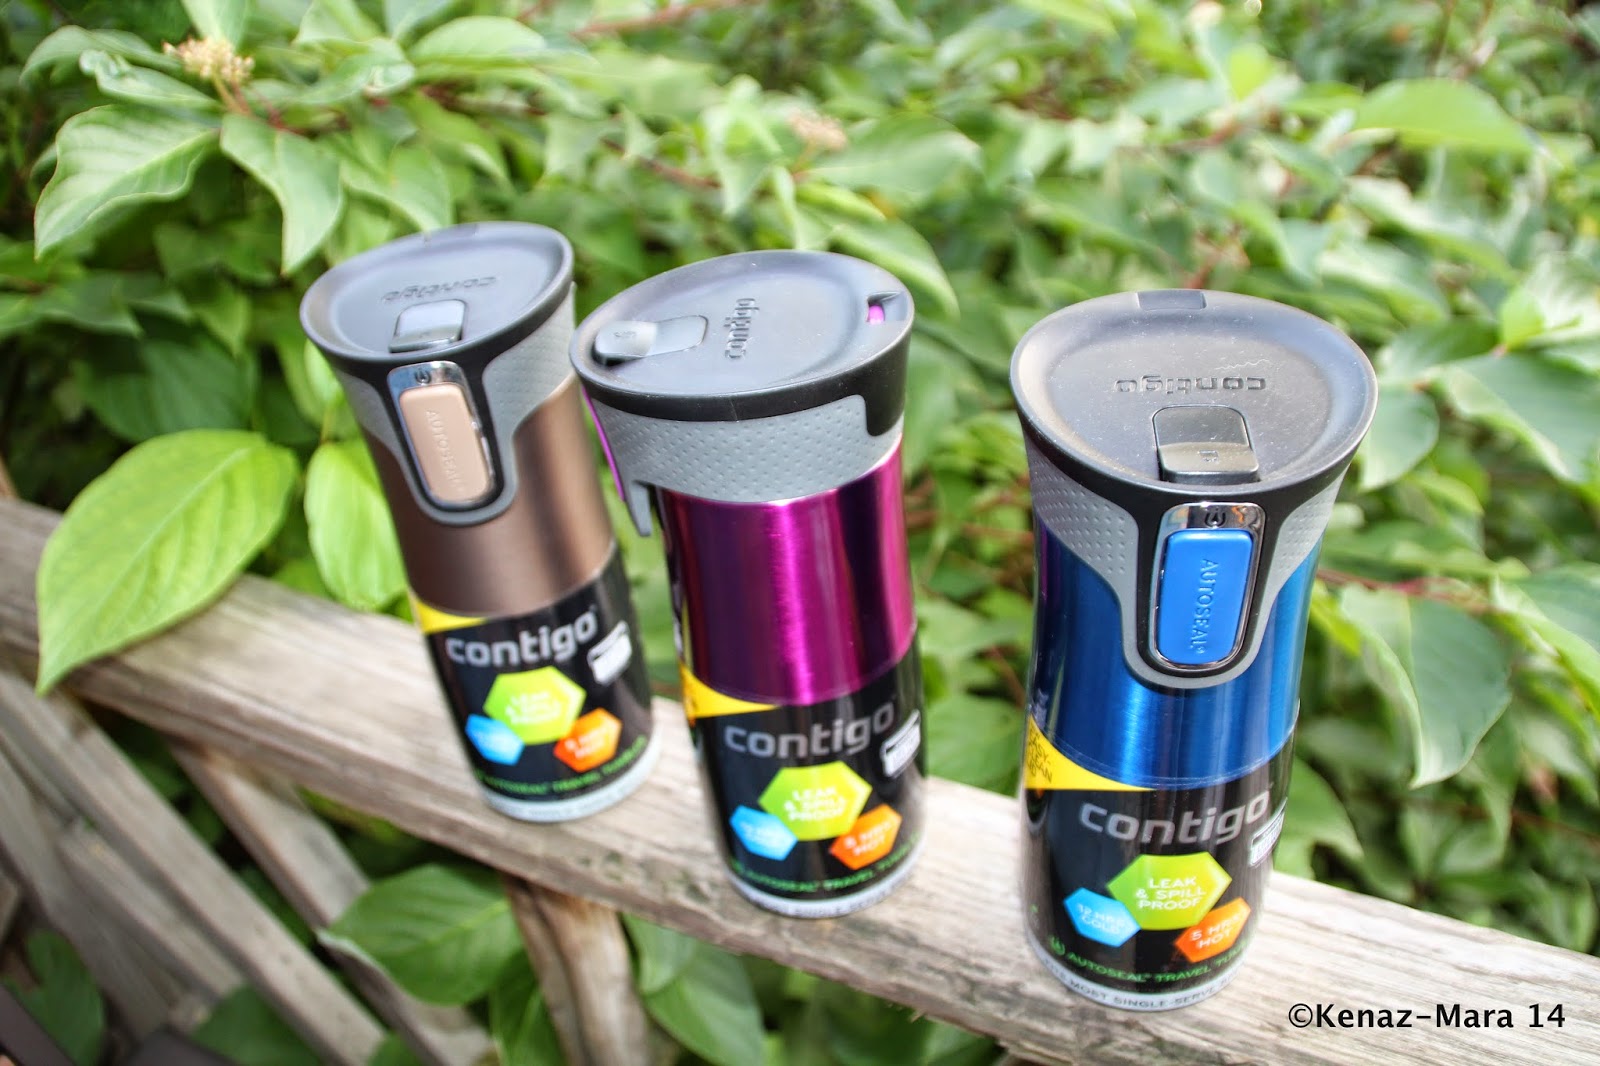 ChiIL Mama : WIN A Pair of Contigo Stainless 16oz West Loop Autoseal Travel  Mugs ($42 value) 2 Winners #BestGotBetter #Giveaway #DiscountCode